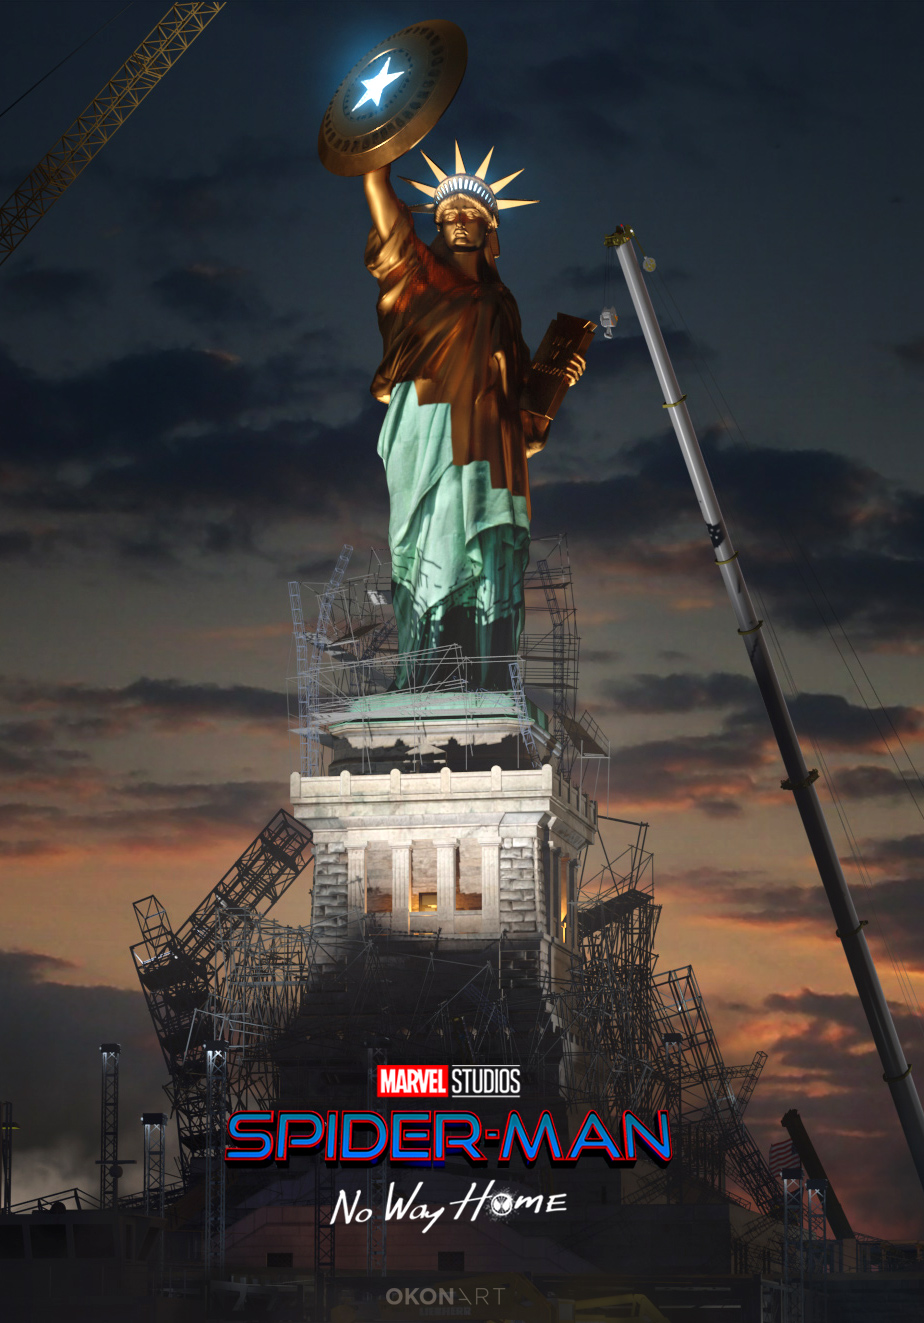 Restoration of the Statue of Liberty